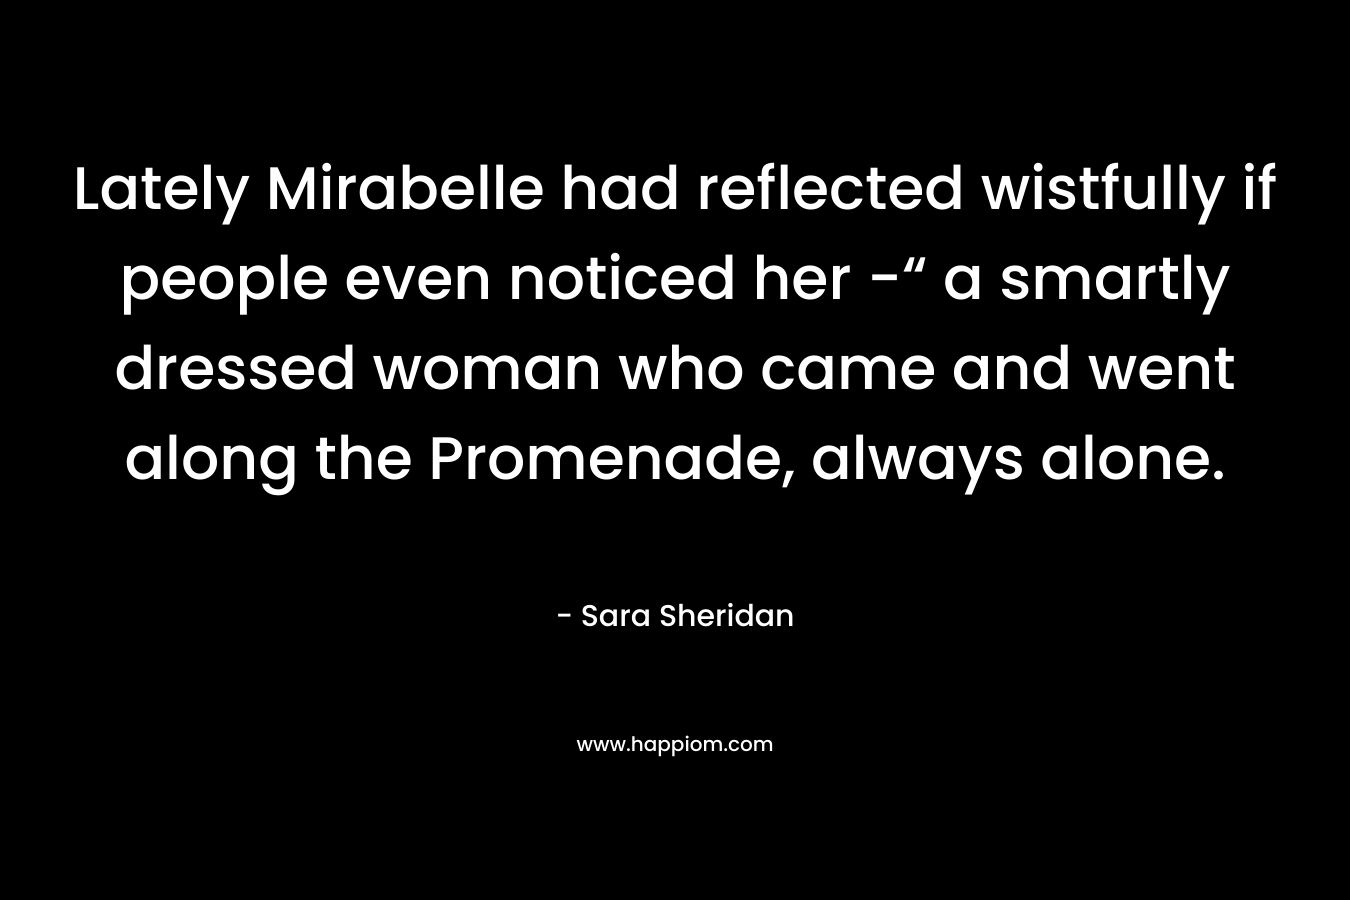 Lately Mirabelle had reflected wistfully if people even noticed her -“ a smartly dressed woman who came and went along the Promenade, always alone.